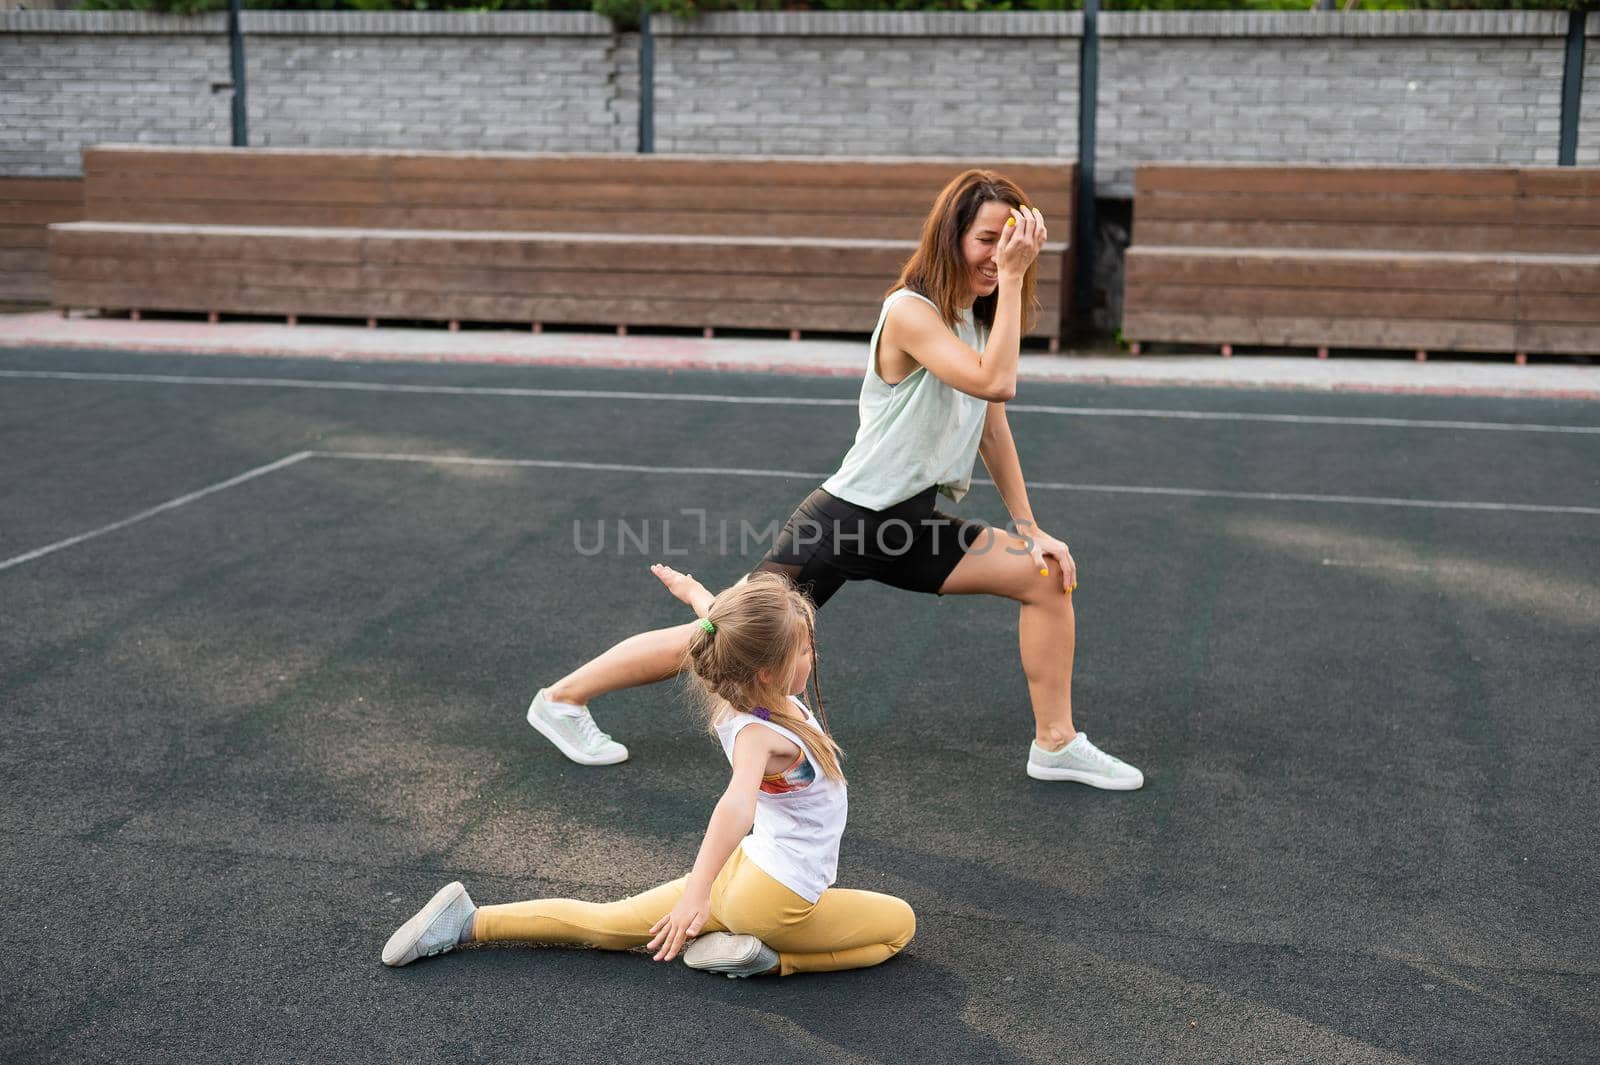 Caucasian woman goes in for sports with her daughter outdoors. A schoolgirl and her mother are running around in the stadium